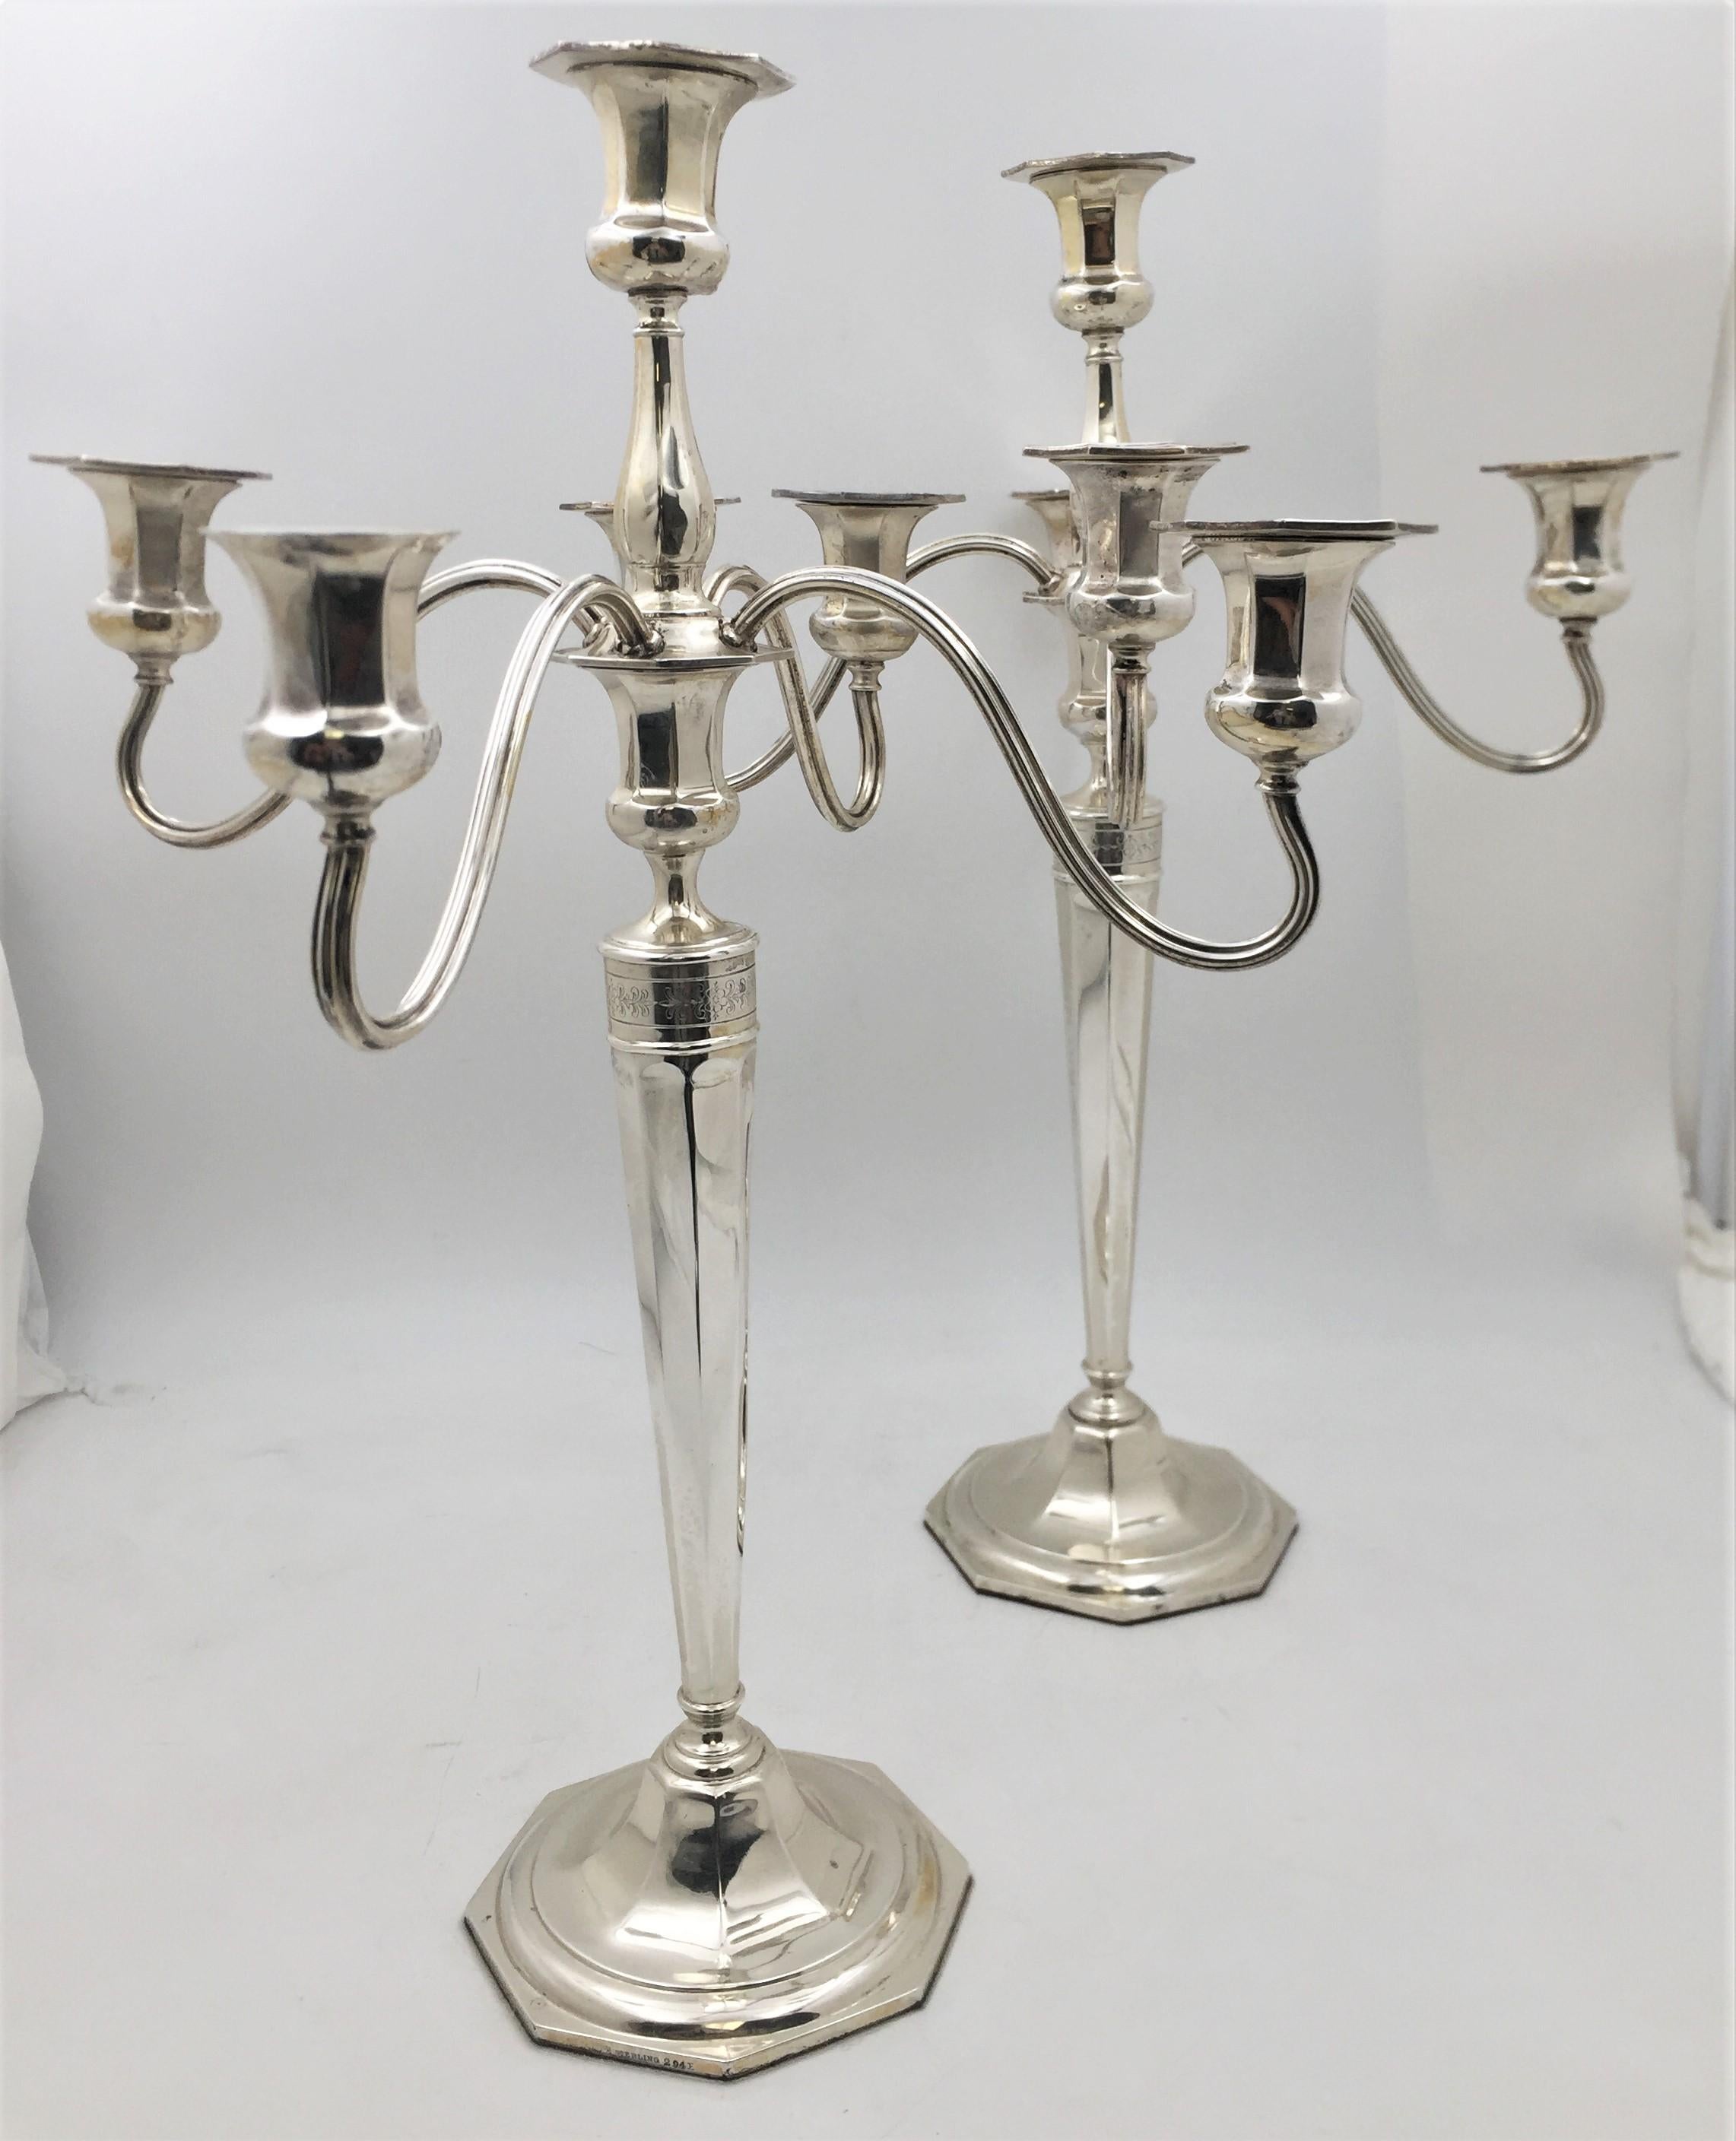 Pair of Reed & Barton sterling silver 5-light candelabra from 1907 in Hepplewhite pattern and in Art Deco style. Standing on octogonal bases, these candelabra typify the Art Deco style with their elegant proportions. An engraved floral frieze adorns